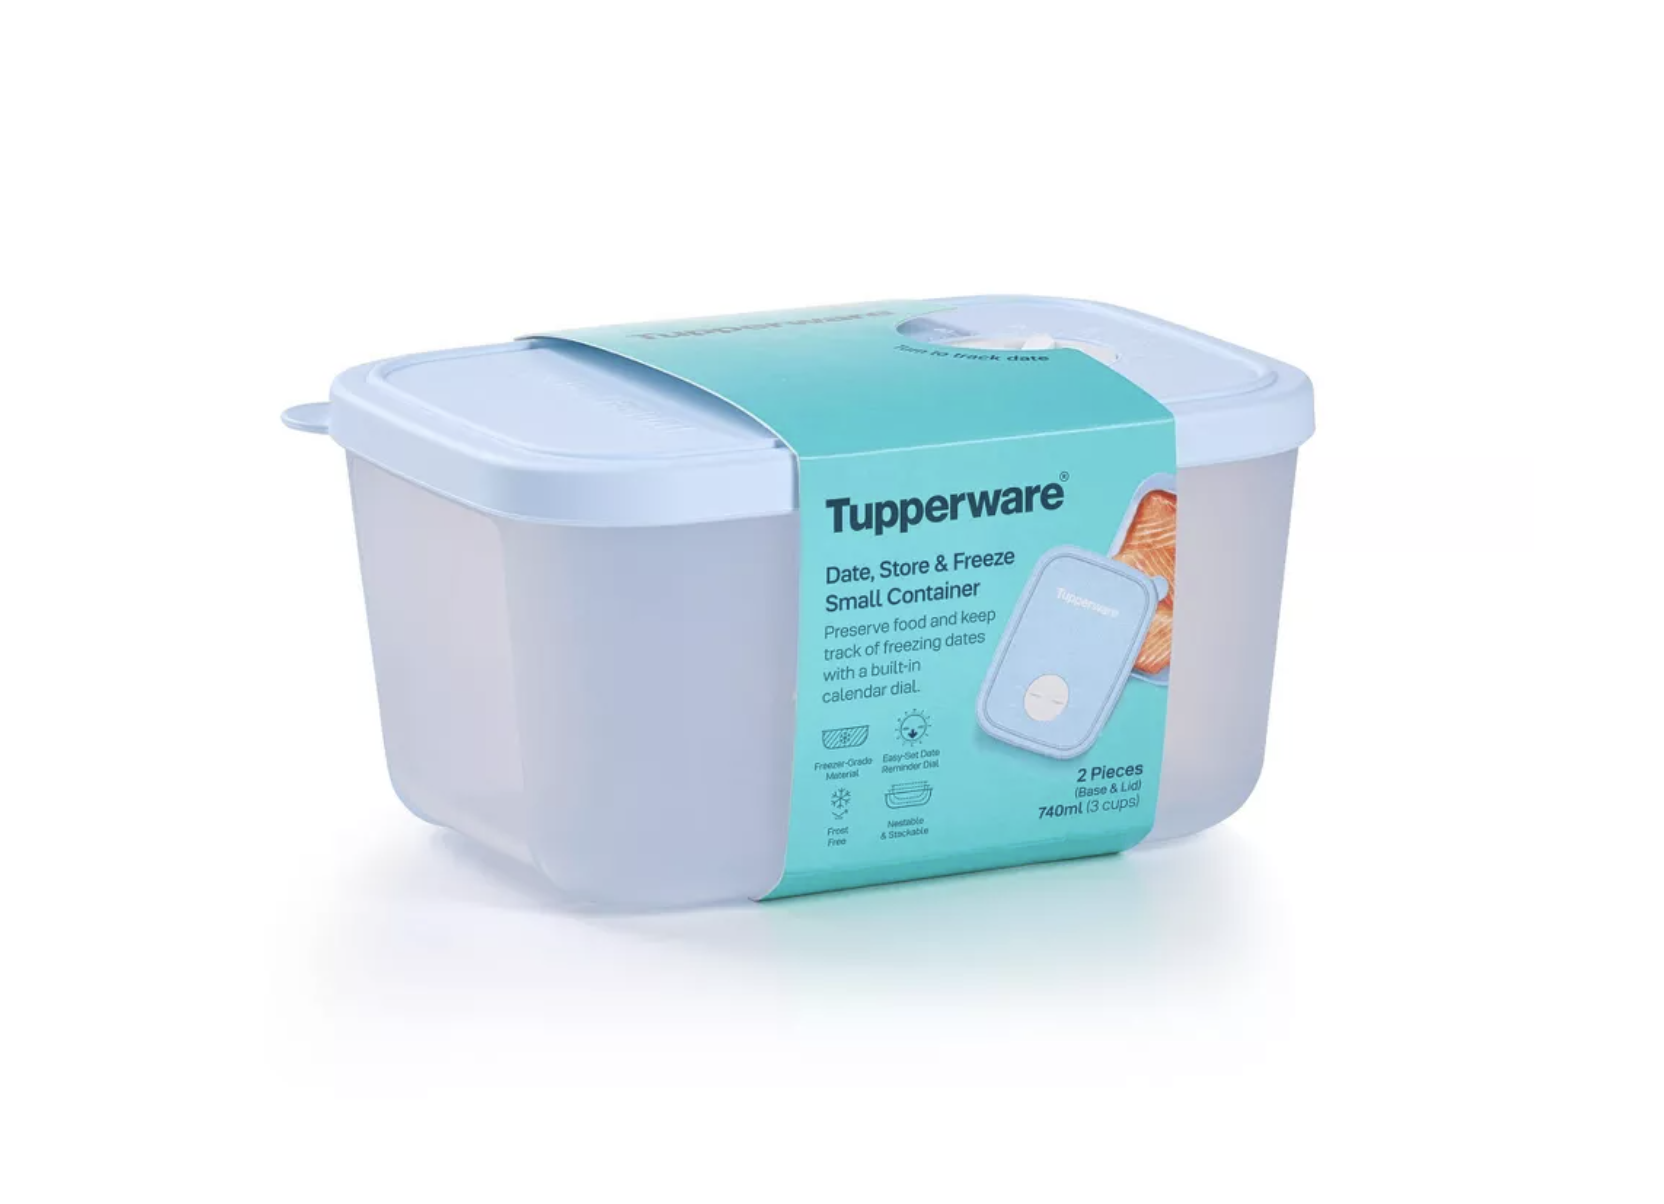 Tupperware: To Know & Save - The Krazy Coupon Lady